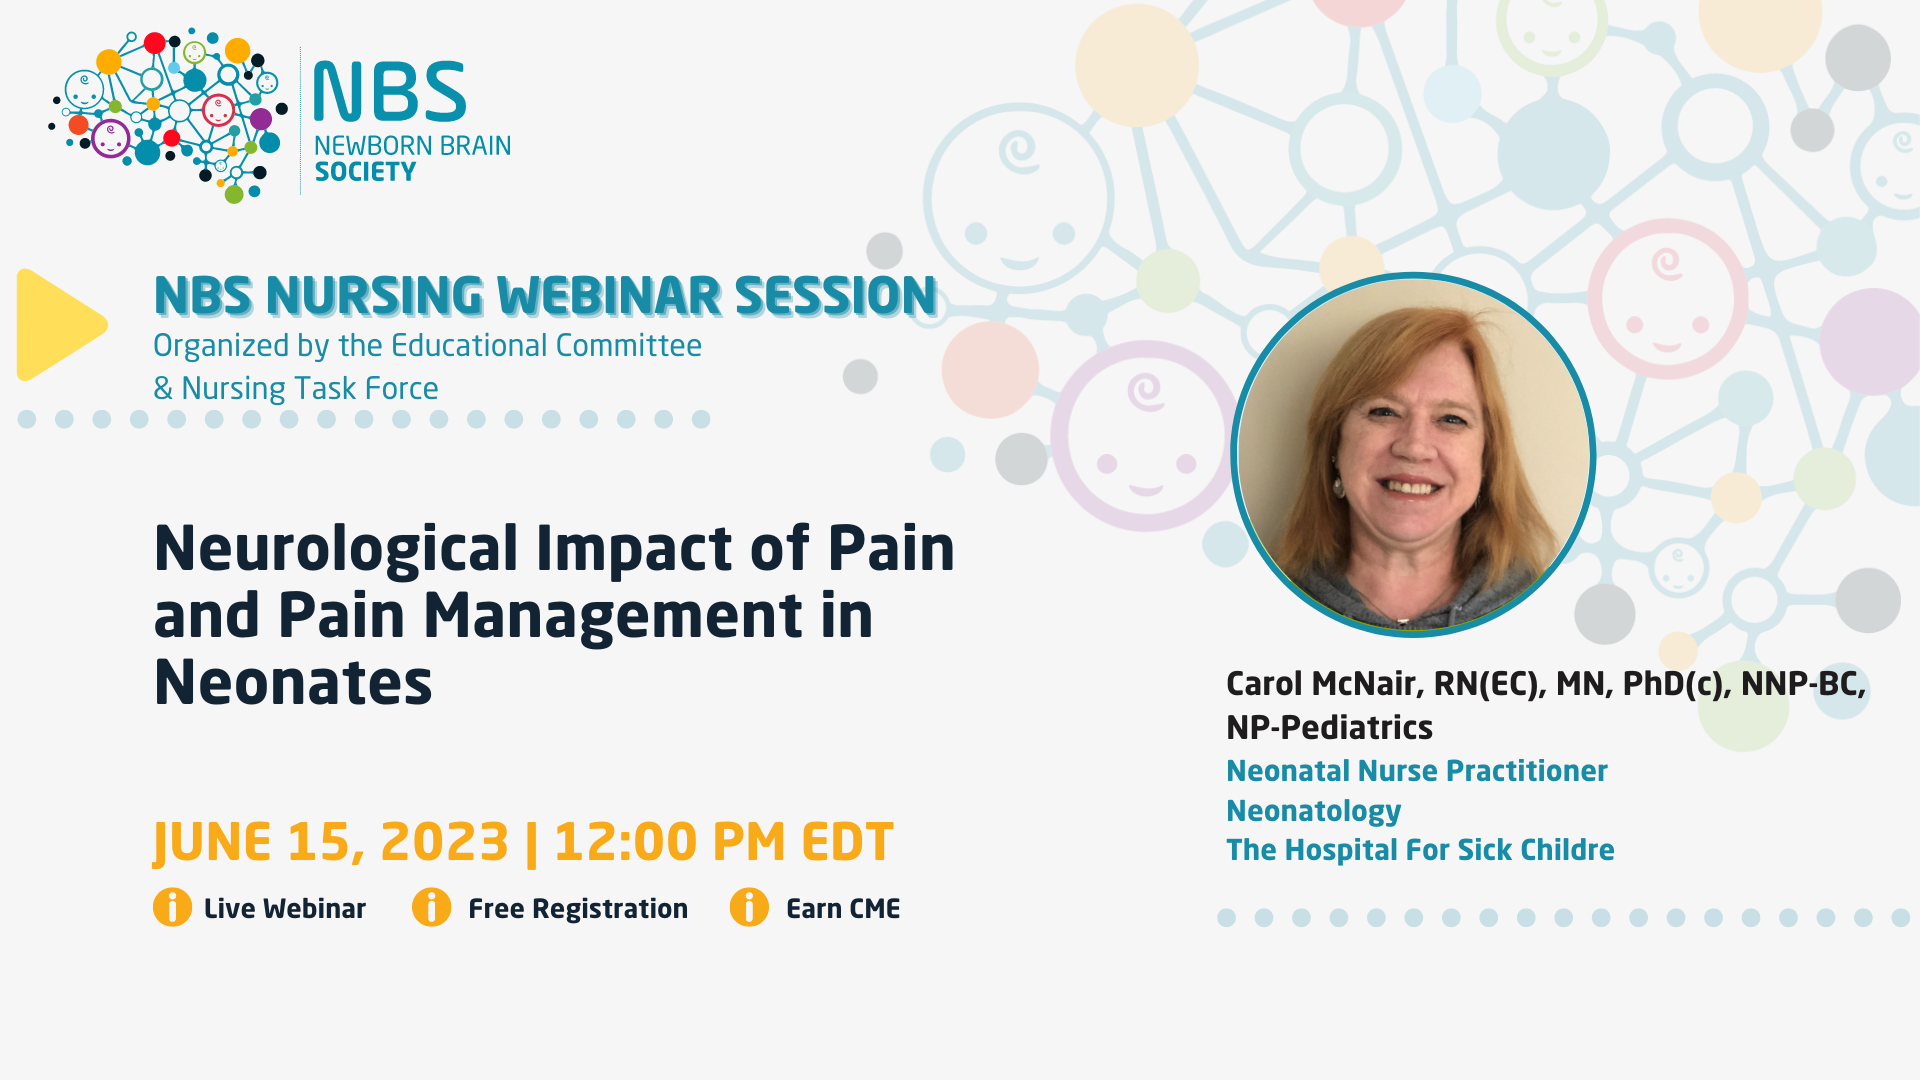 Neurological Impact of Pain and Pain Management in Neonates